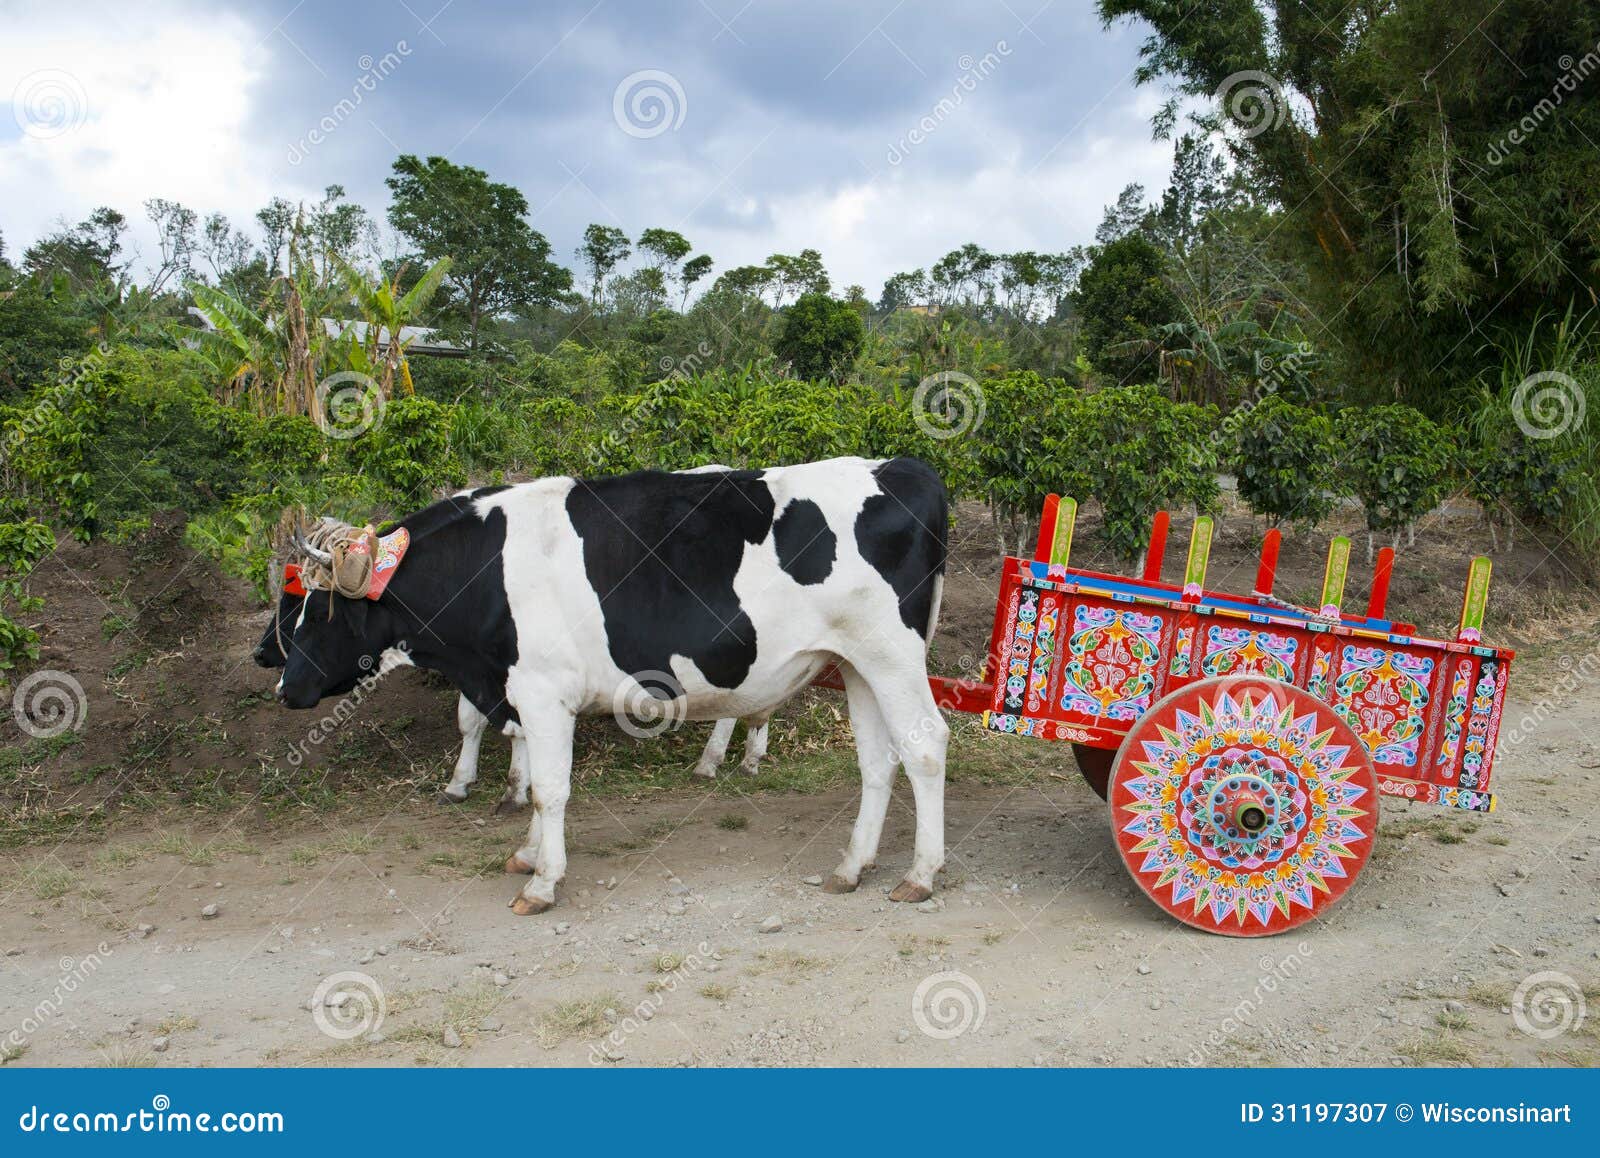 ox cart and cows on coffee plantation in costa rica, travel